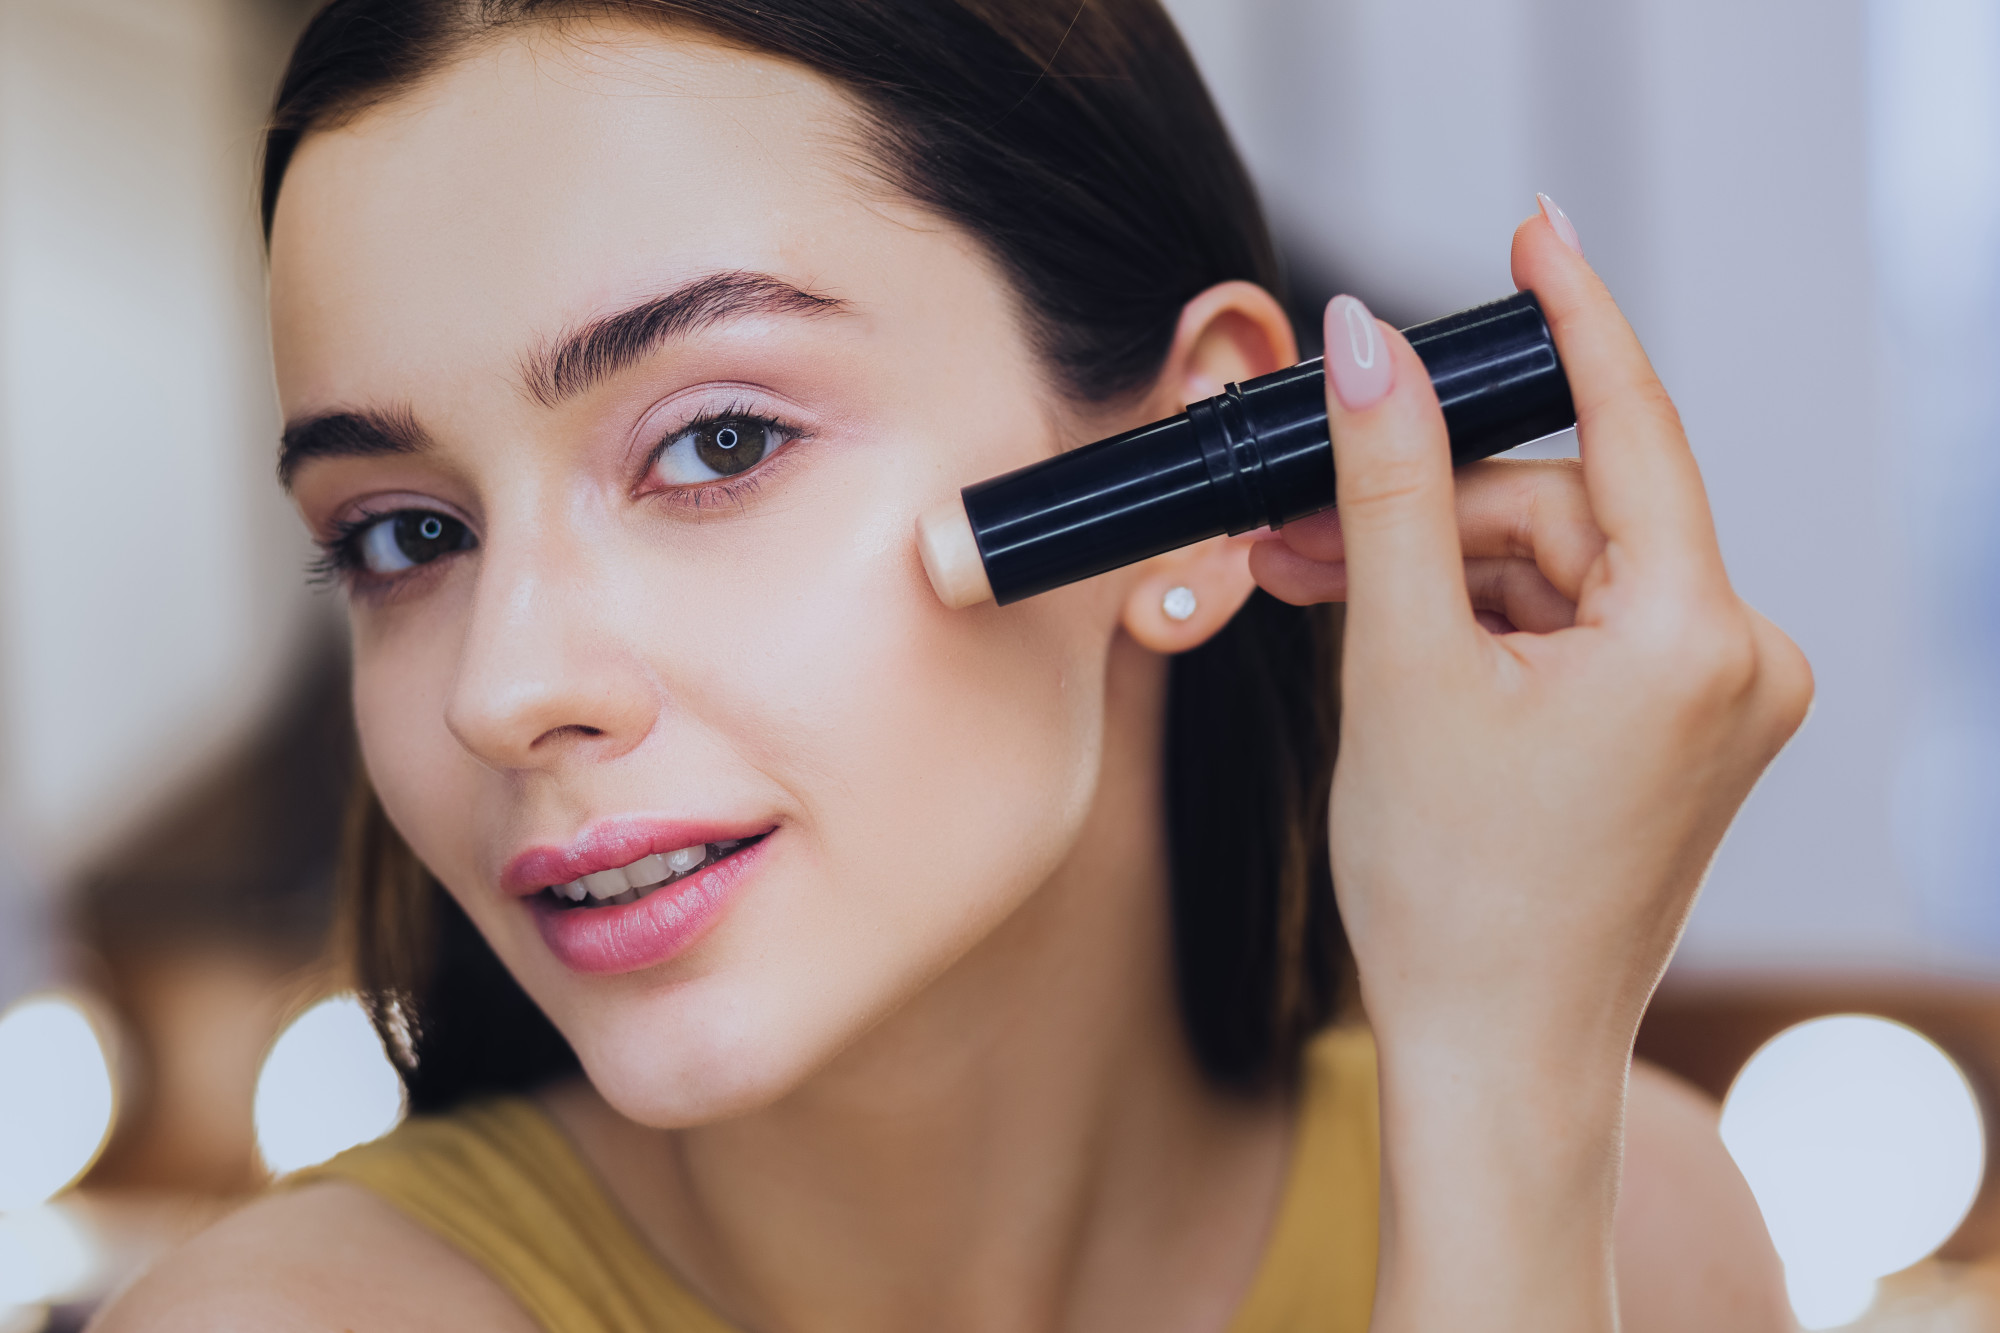 At Last, Here Are the Latest Makeup Trends for 2019